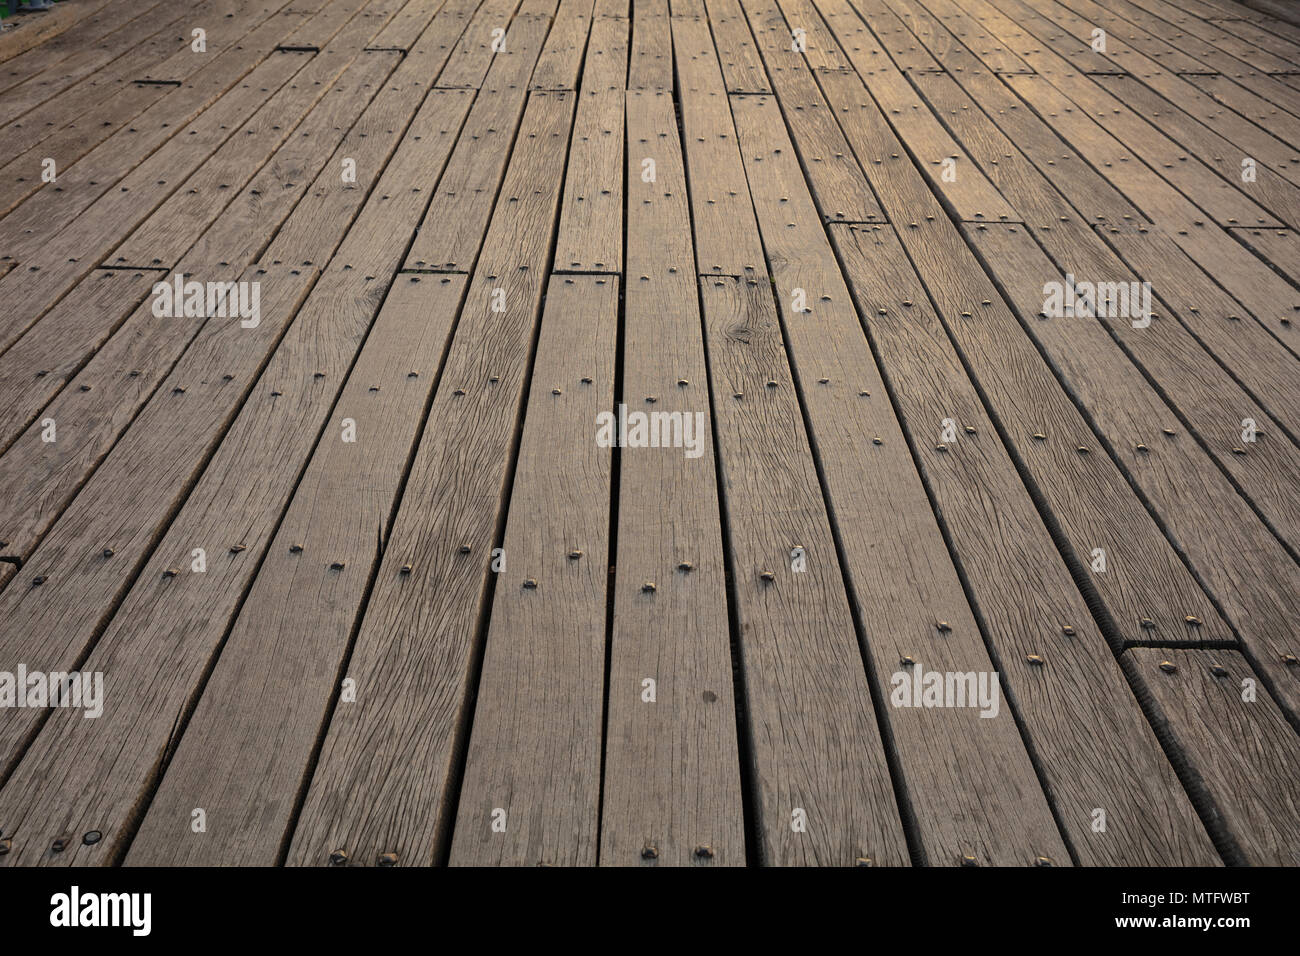 Old wooden deck background, texture. Closeup view with details Stock Photo